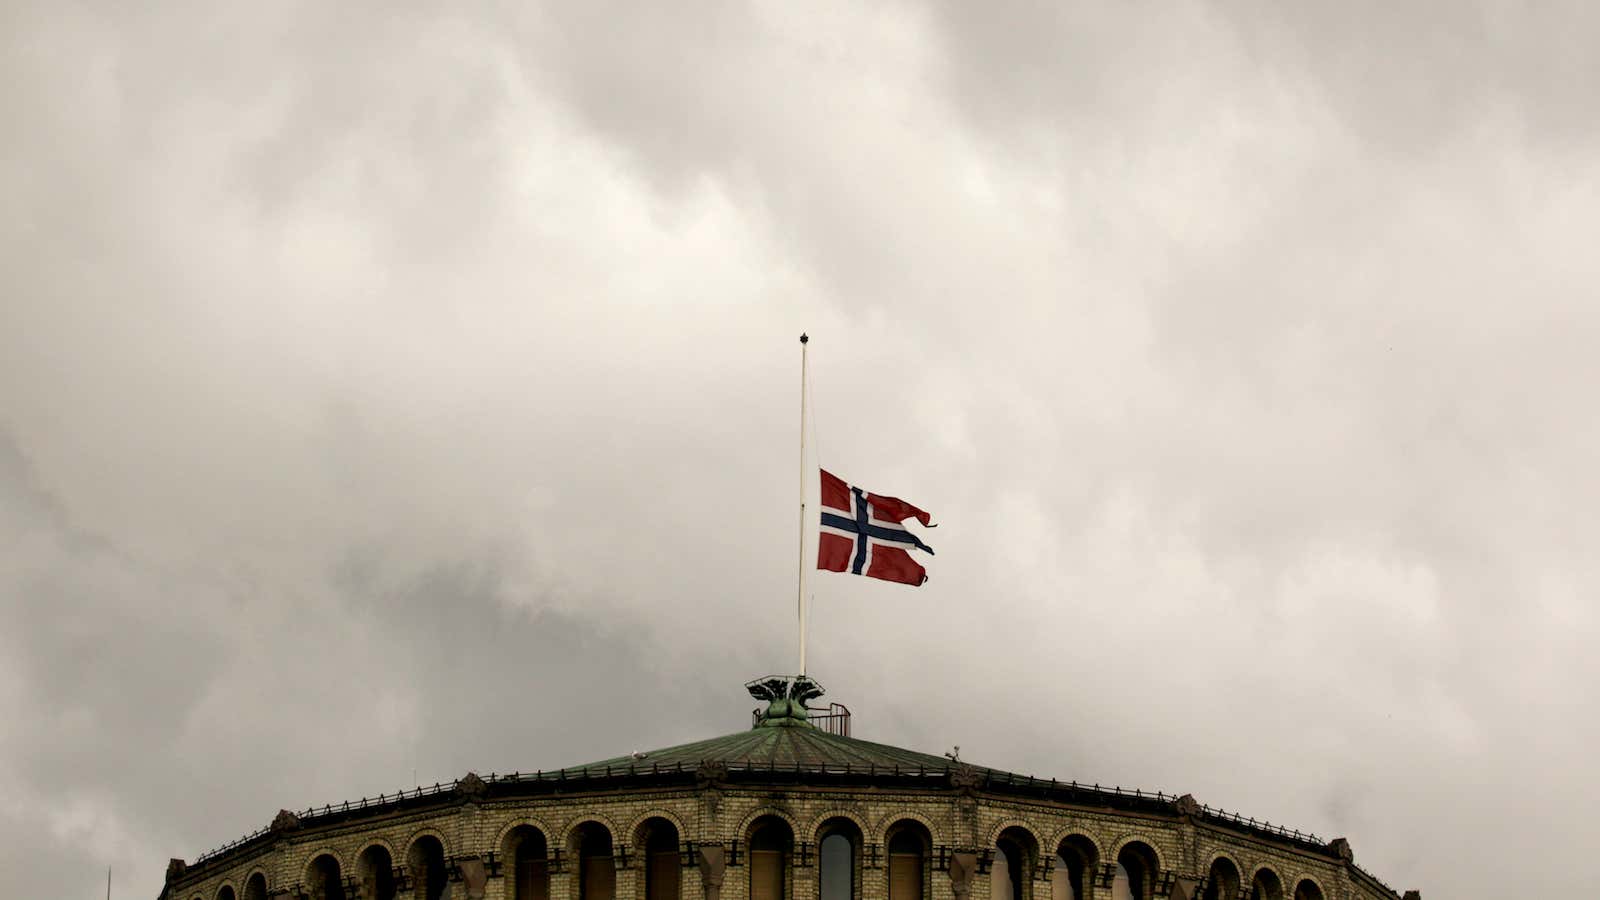 The Norwegian flag flutters at half-mast on the roof of the parliament building in Oslo July 23, 2011. Norwegian police searched for more victims on…